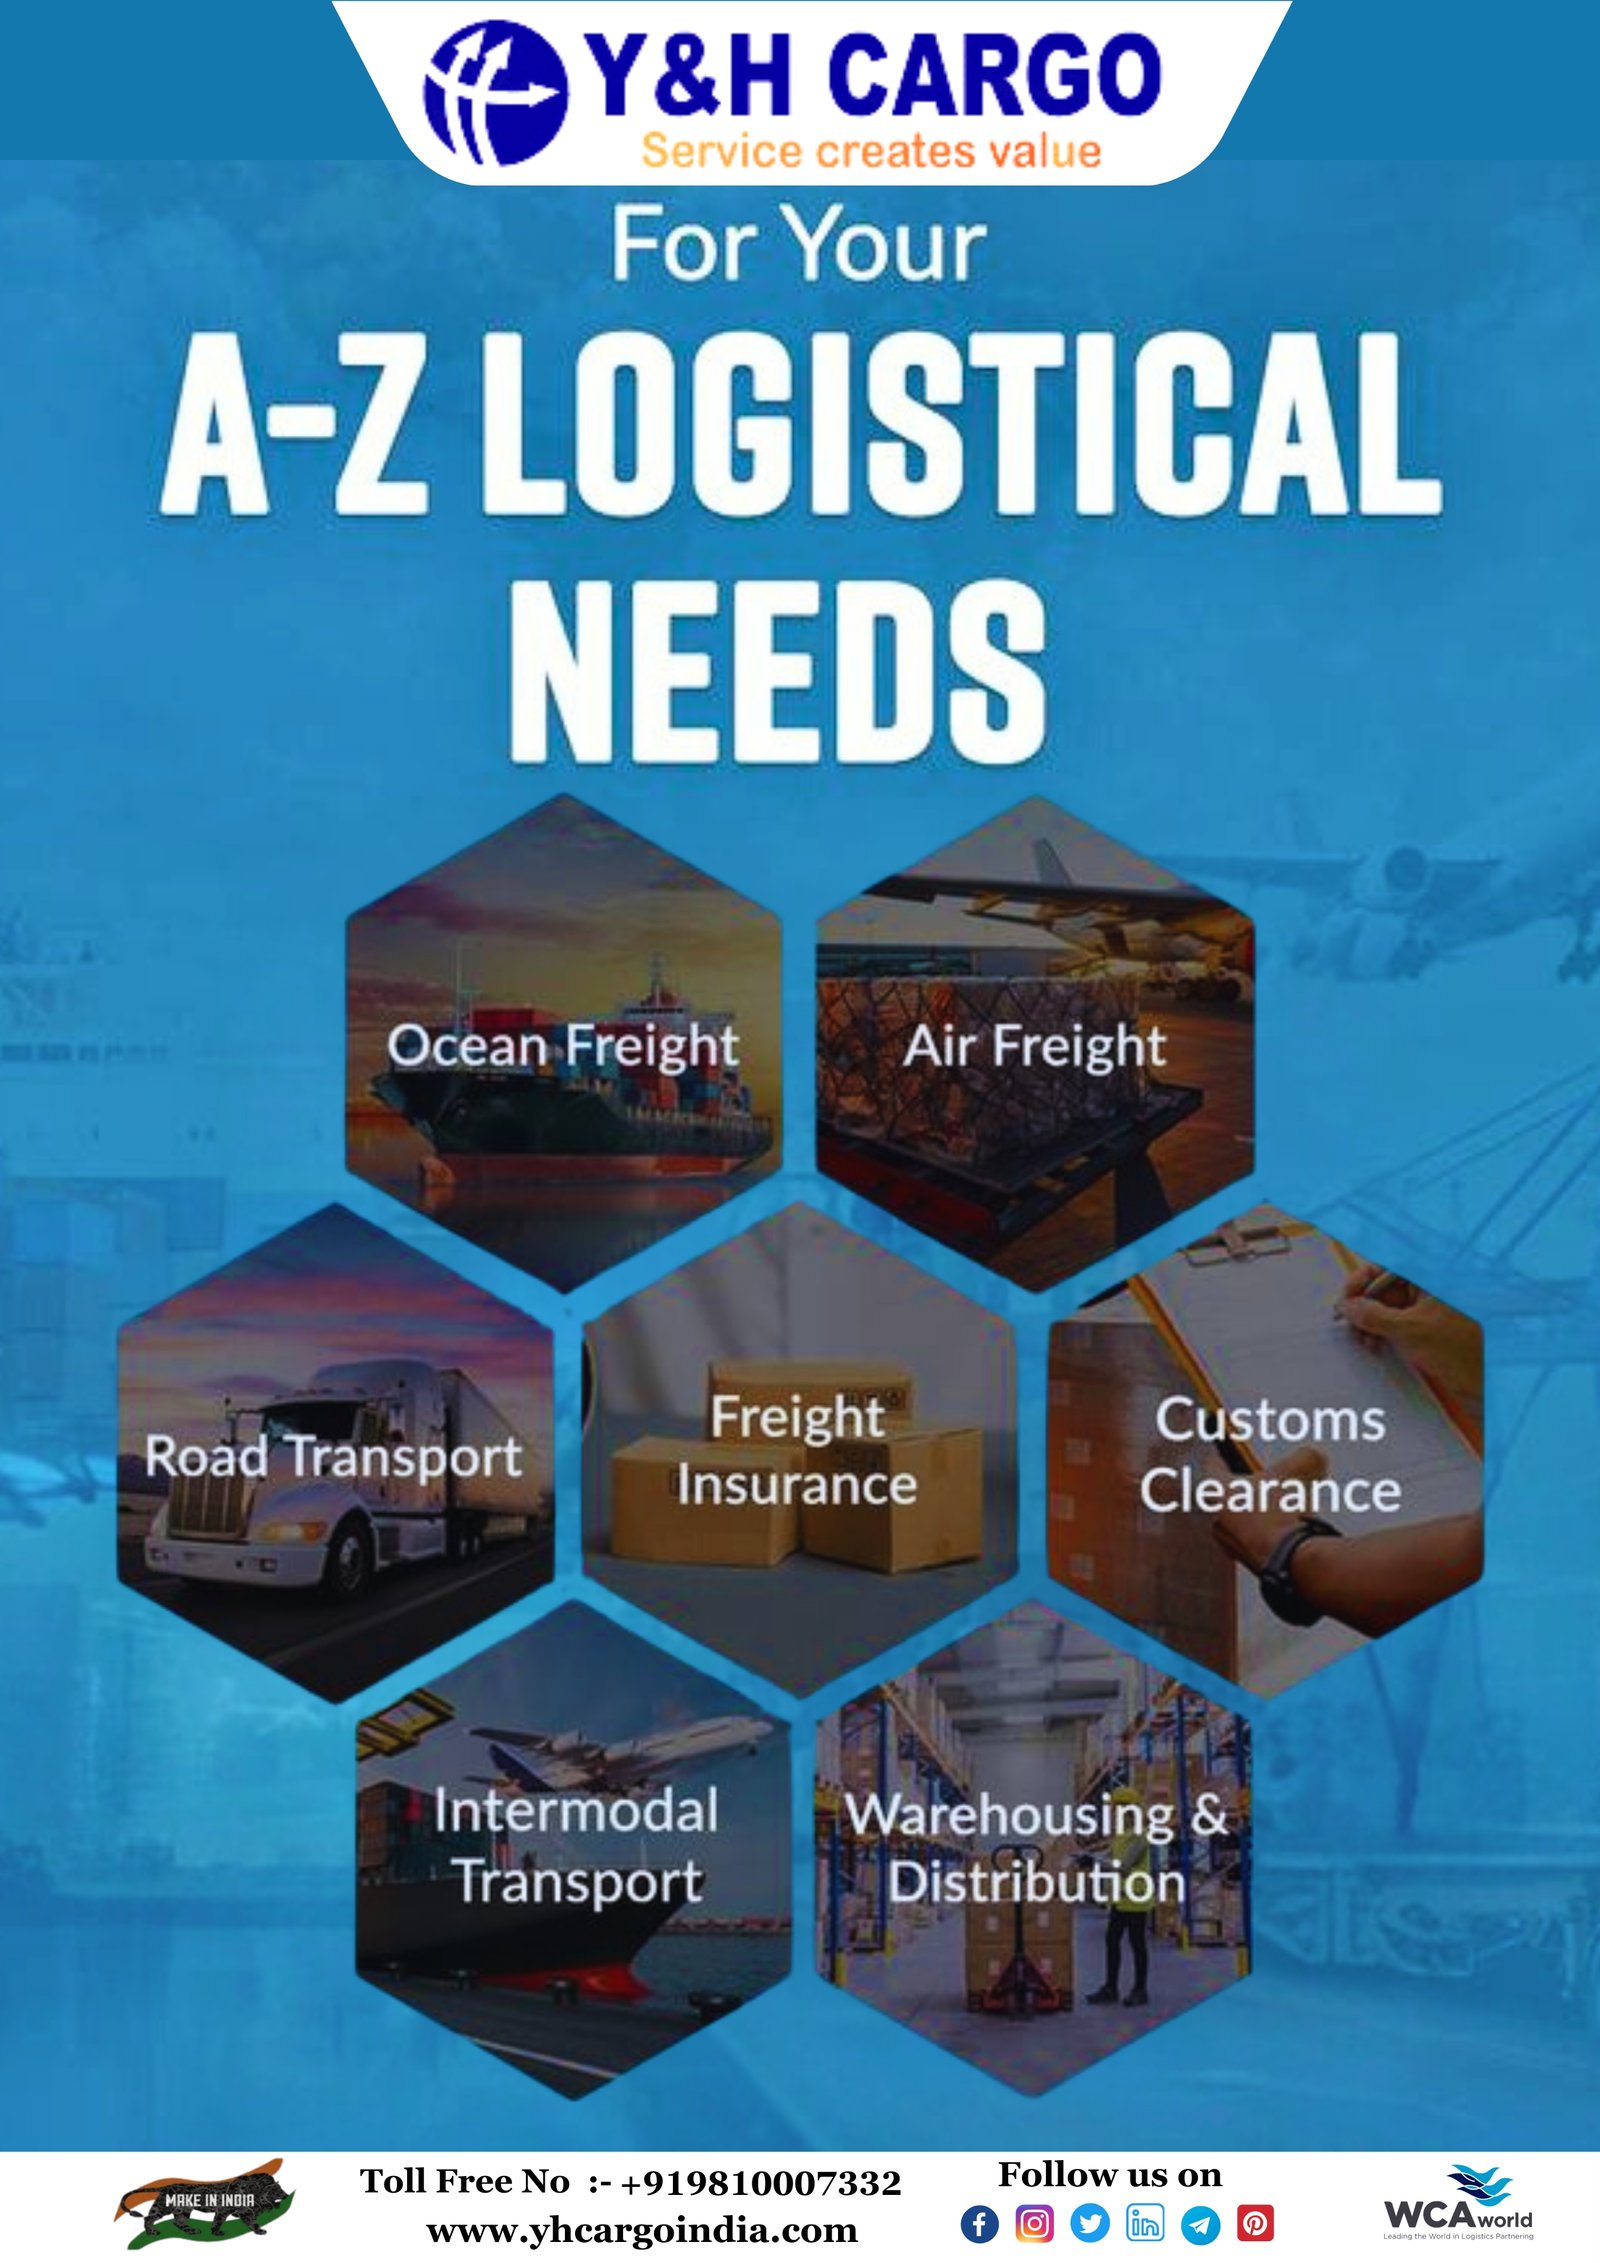 Your One-Stop Shop for All Logistical Needs ....